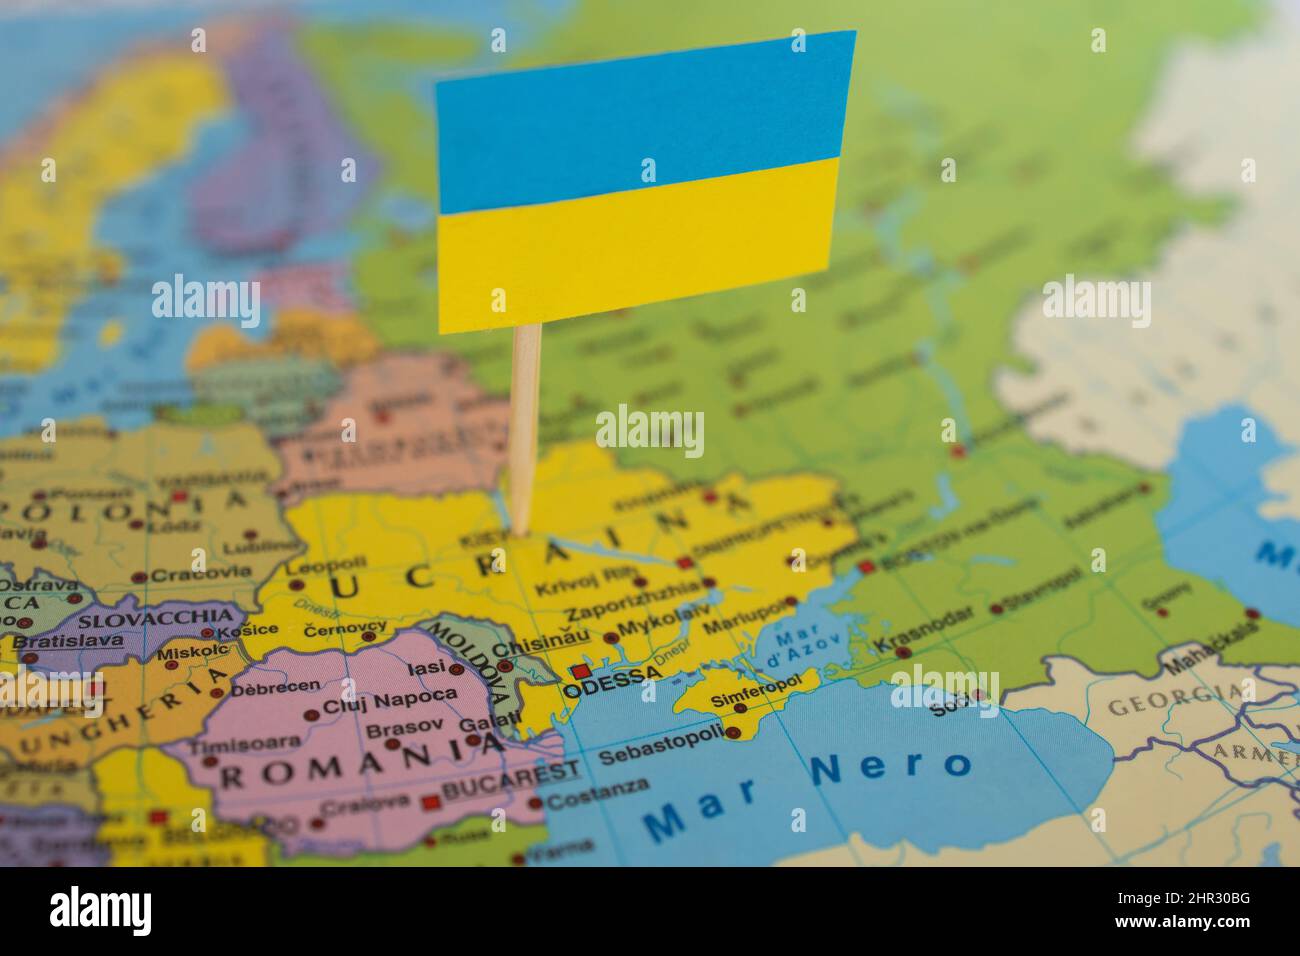 Russia Map Country Flag Background Illustration Stock Photo by ©iqoncept  647413300